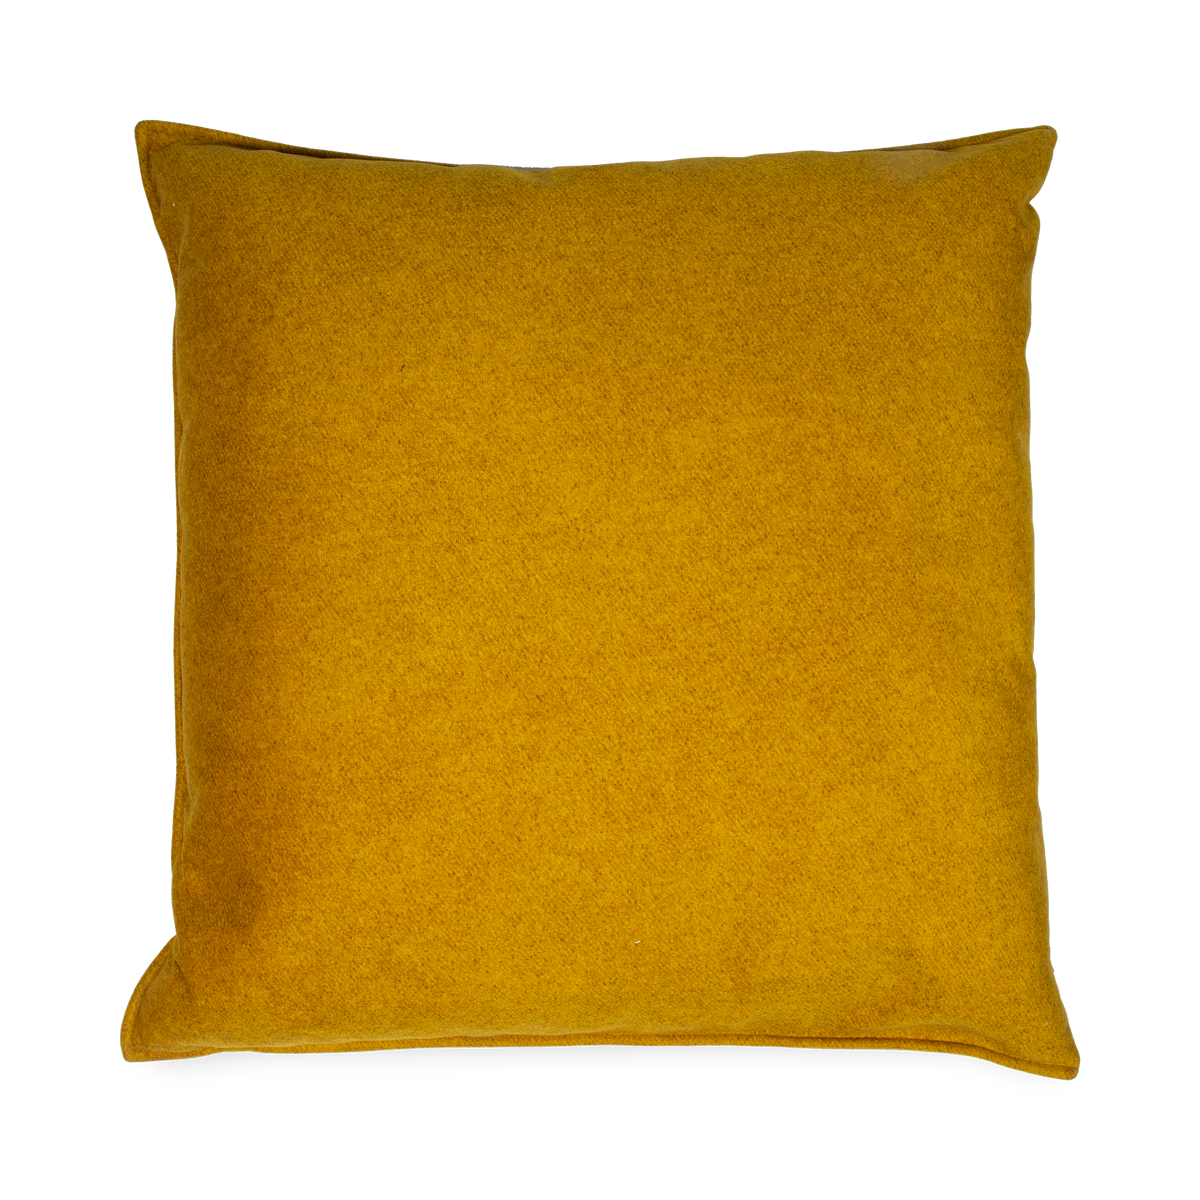 Elevating a classic design with a focus on textural appeal, the Scout Pillow has a lightly textured fabric that is perfect for enhancing your bedding or seating decor in a confiden